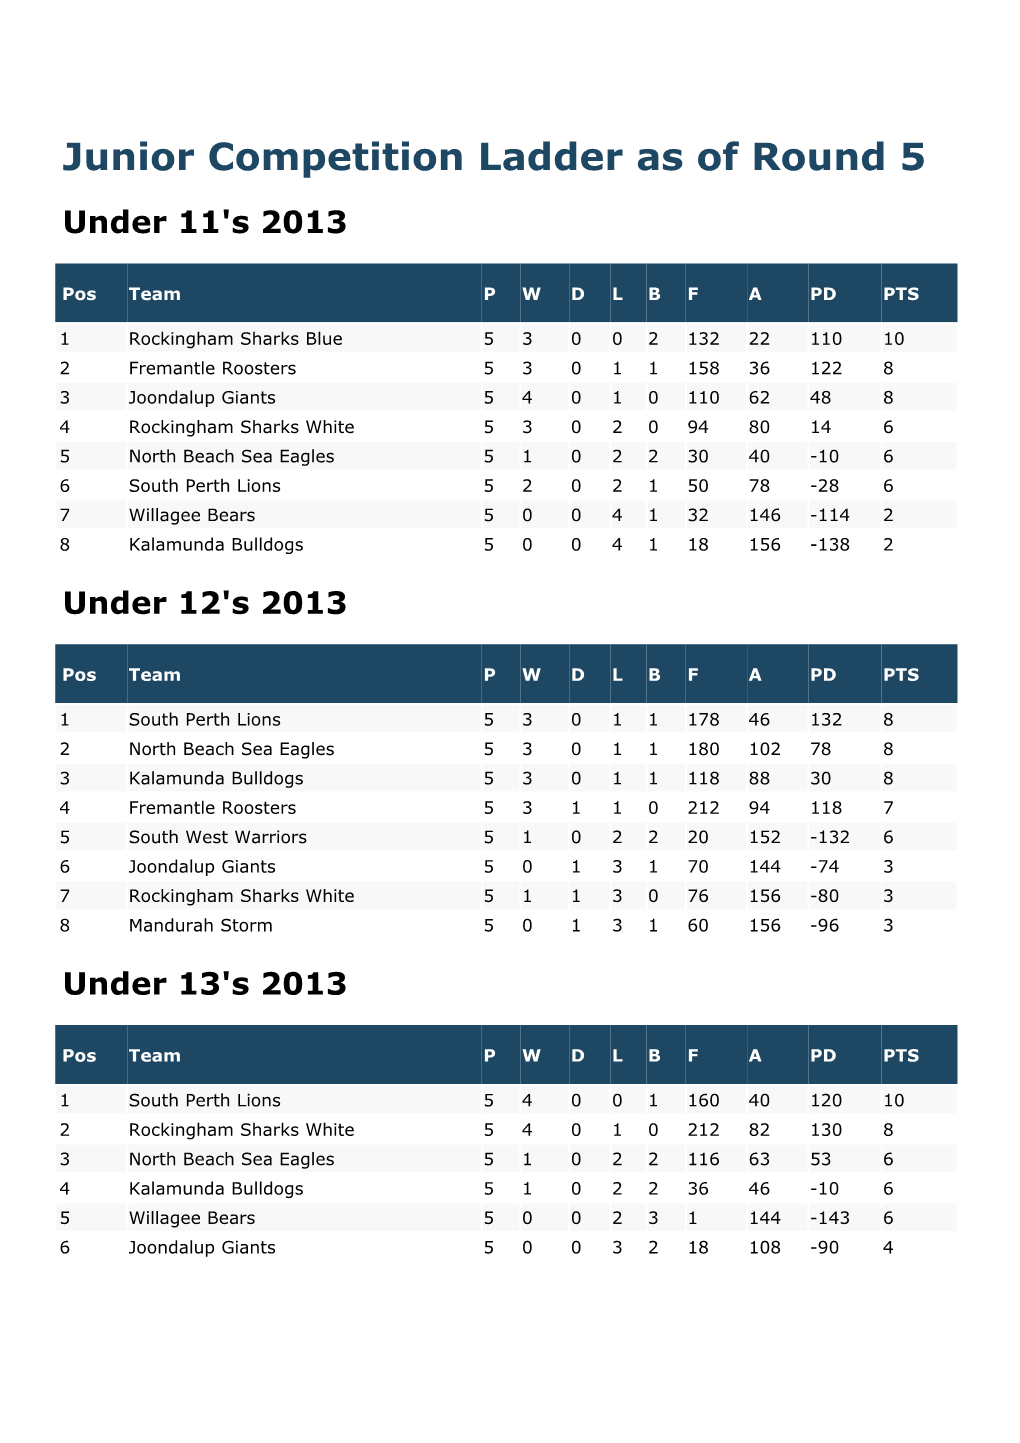 Junior Competition Ladder As of Round 5